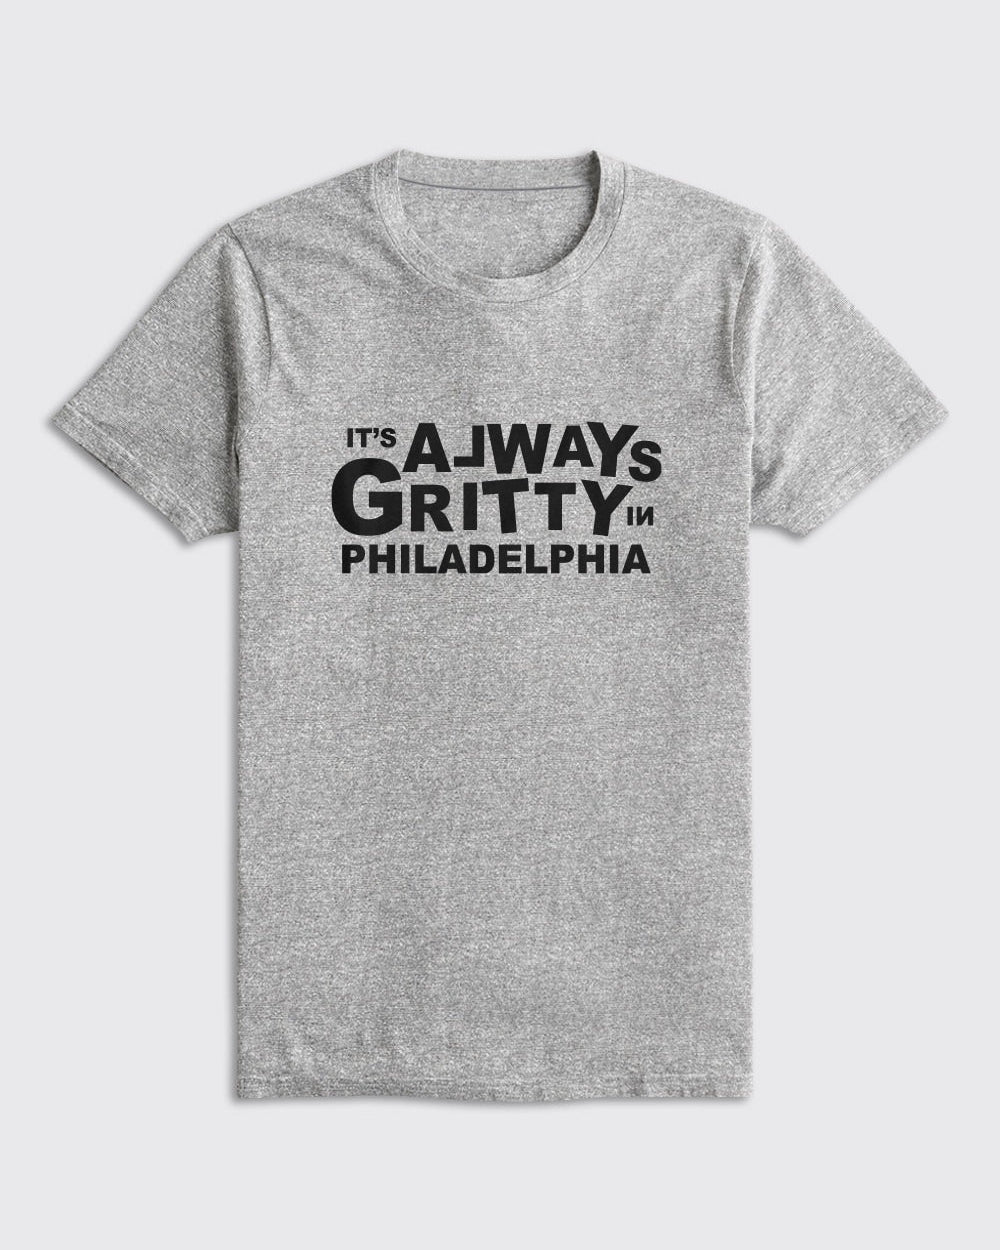 It's Always Gritty In Philadelphia Shirt - Flyers, T-Shirts - Philly Sports Shirts